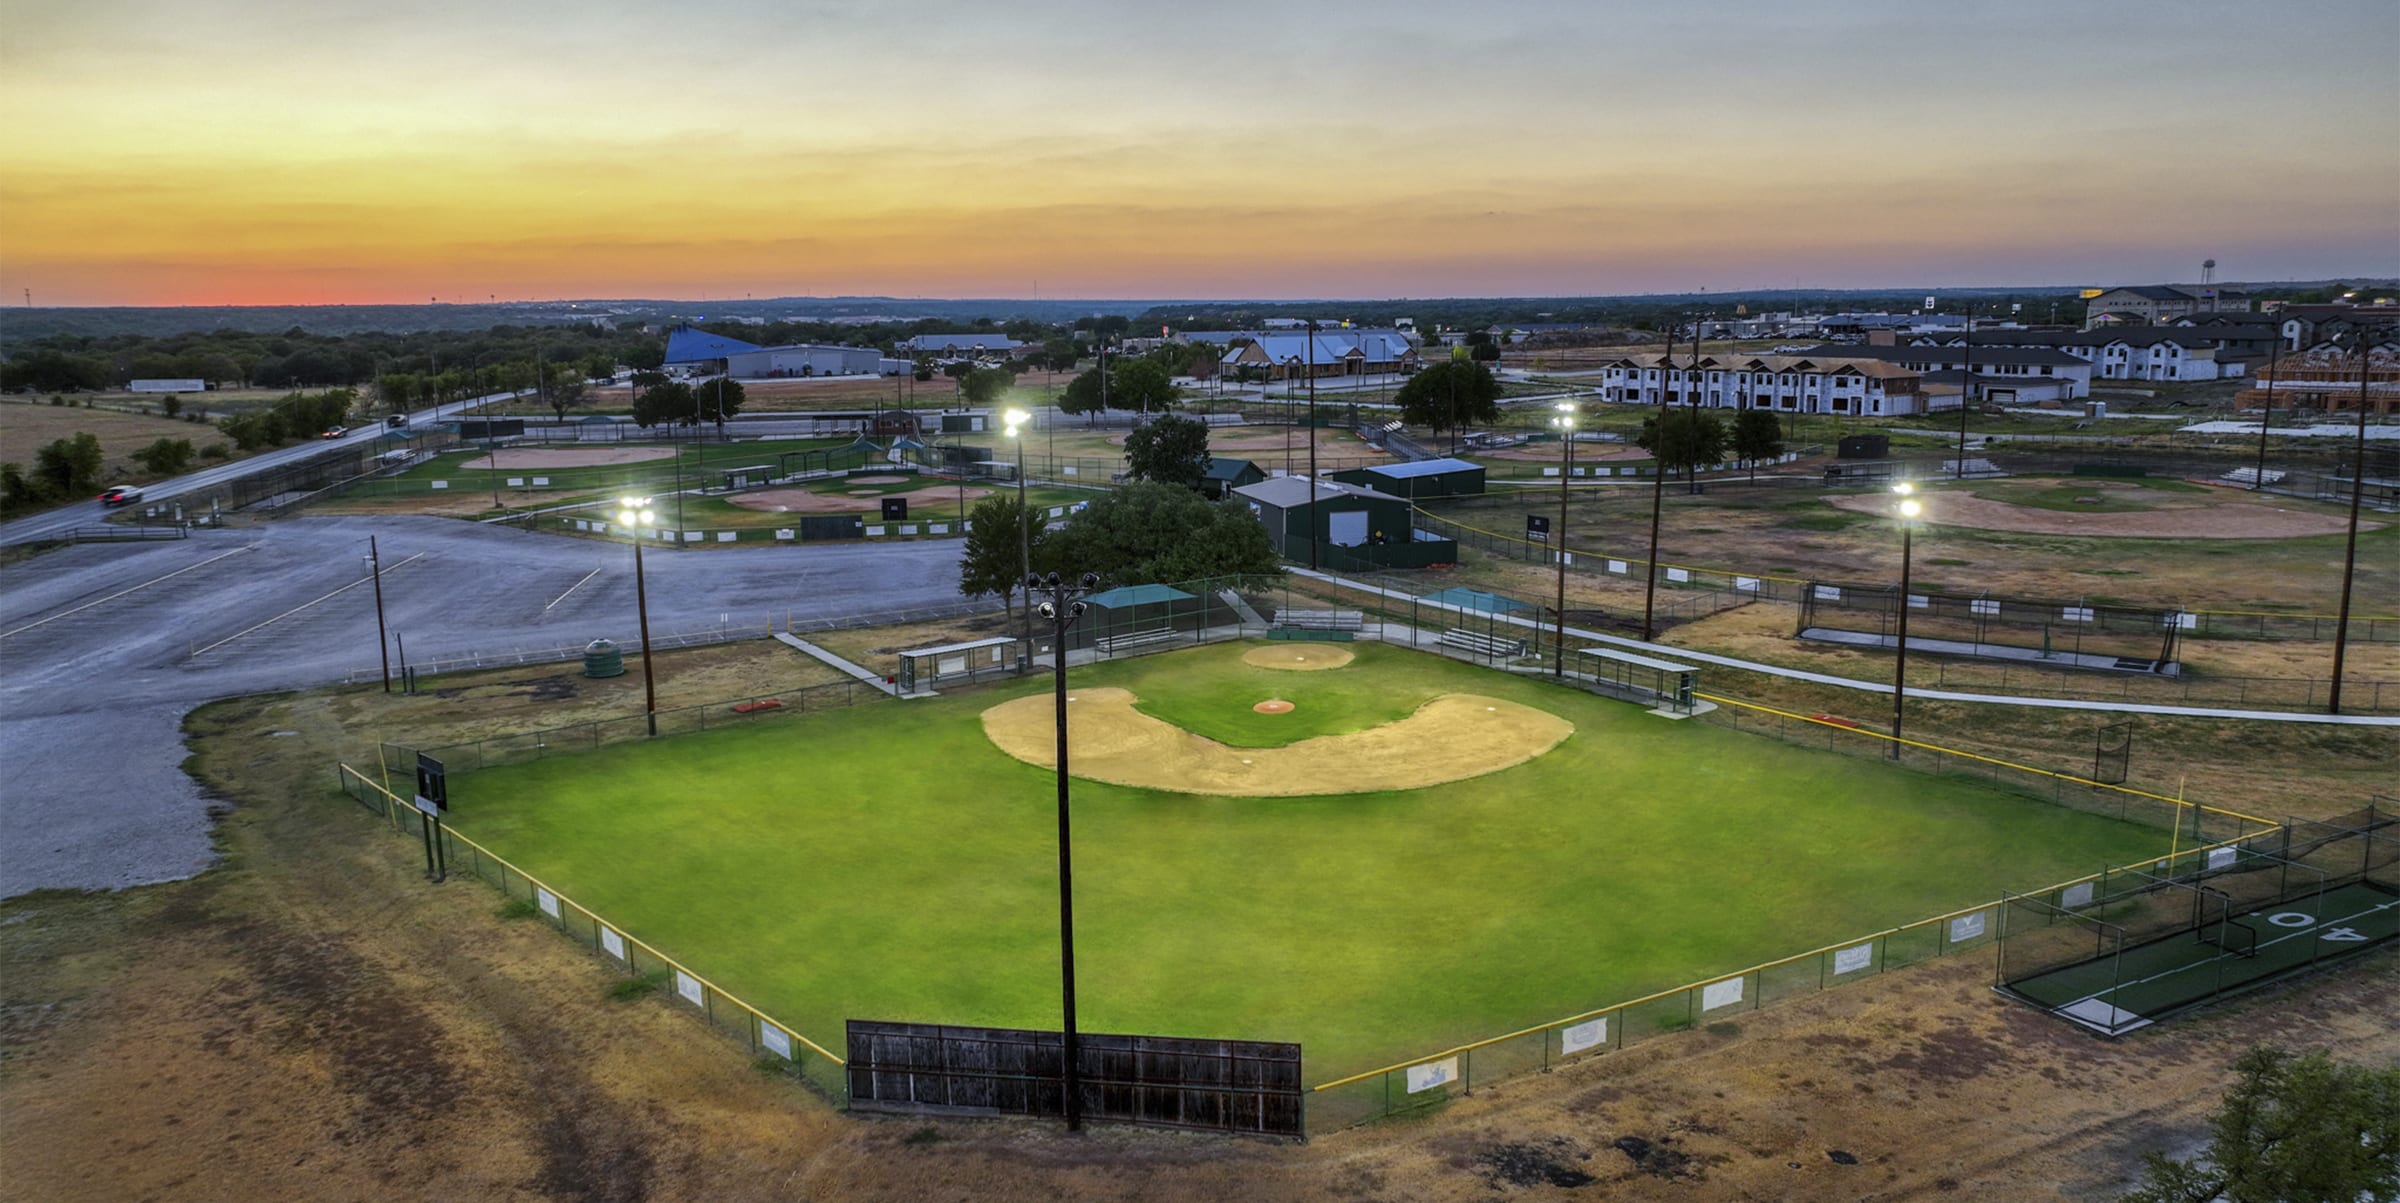 Casestudy Galleryimage Aledobaseball - WLS Lighting Systems